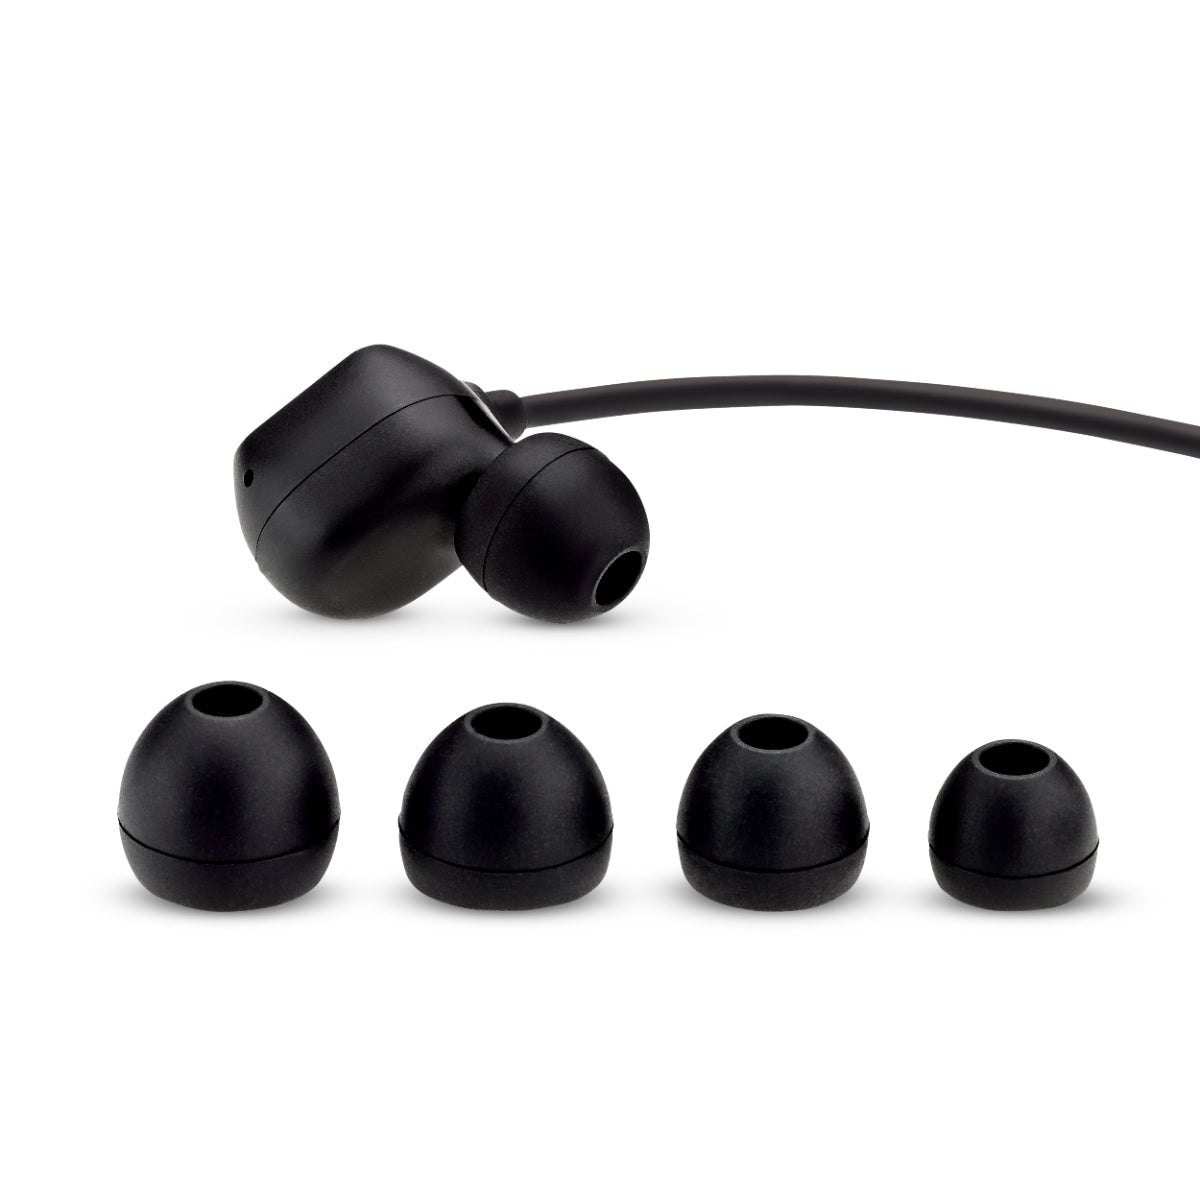 EPOS ADAPT 460 BT ANC In-ear Neckband Headset, Black, With Dongle & Case